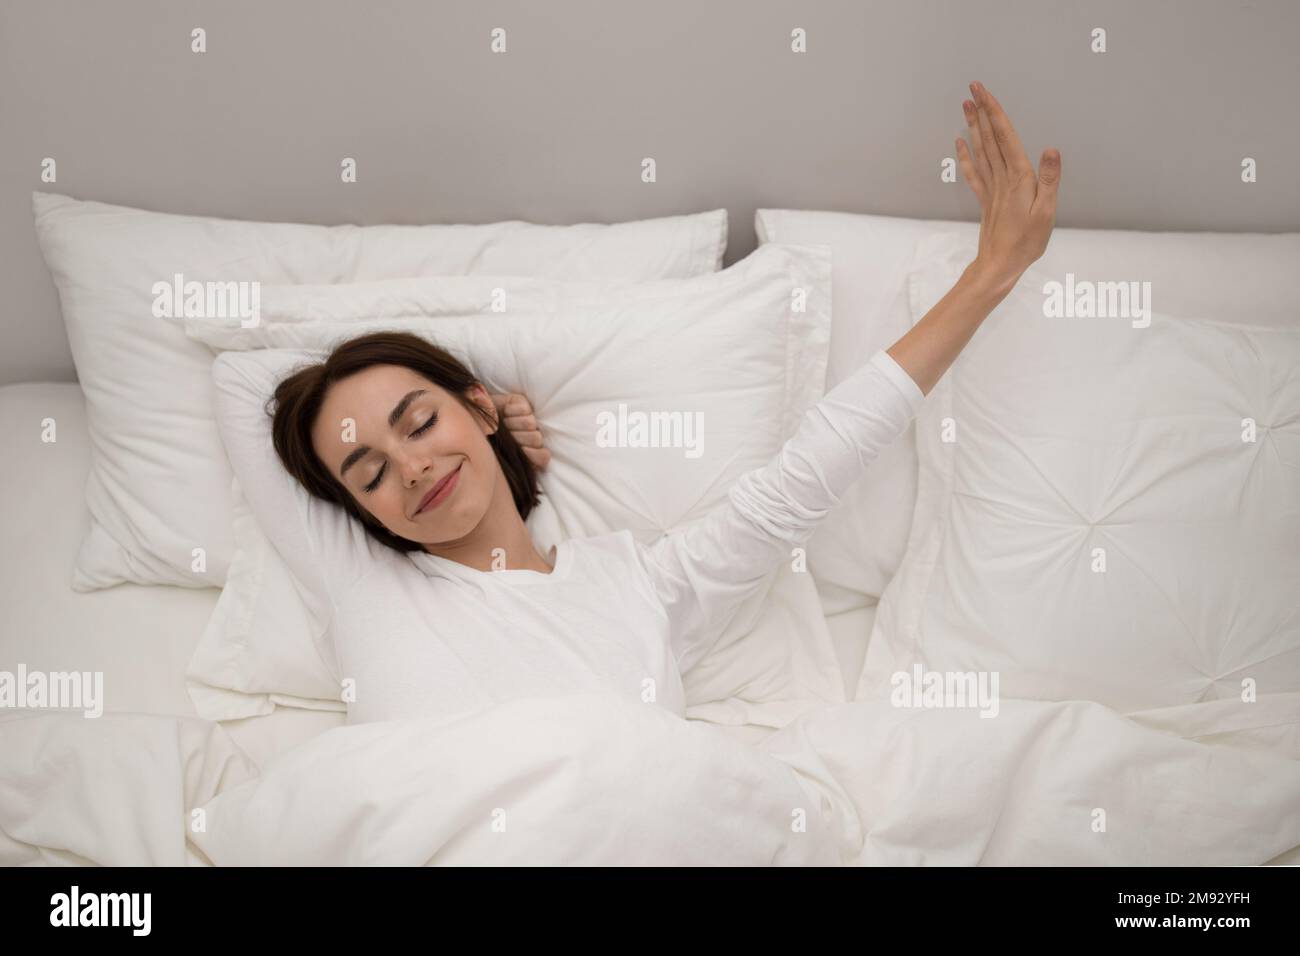 Joyful young lady stretching in bed after waking up Stock Photo